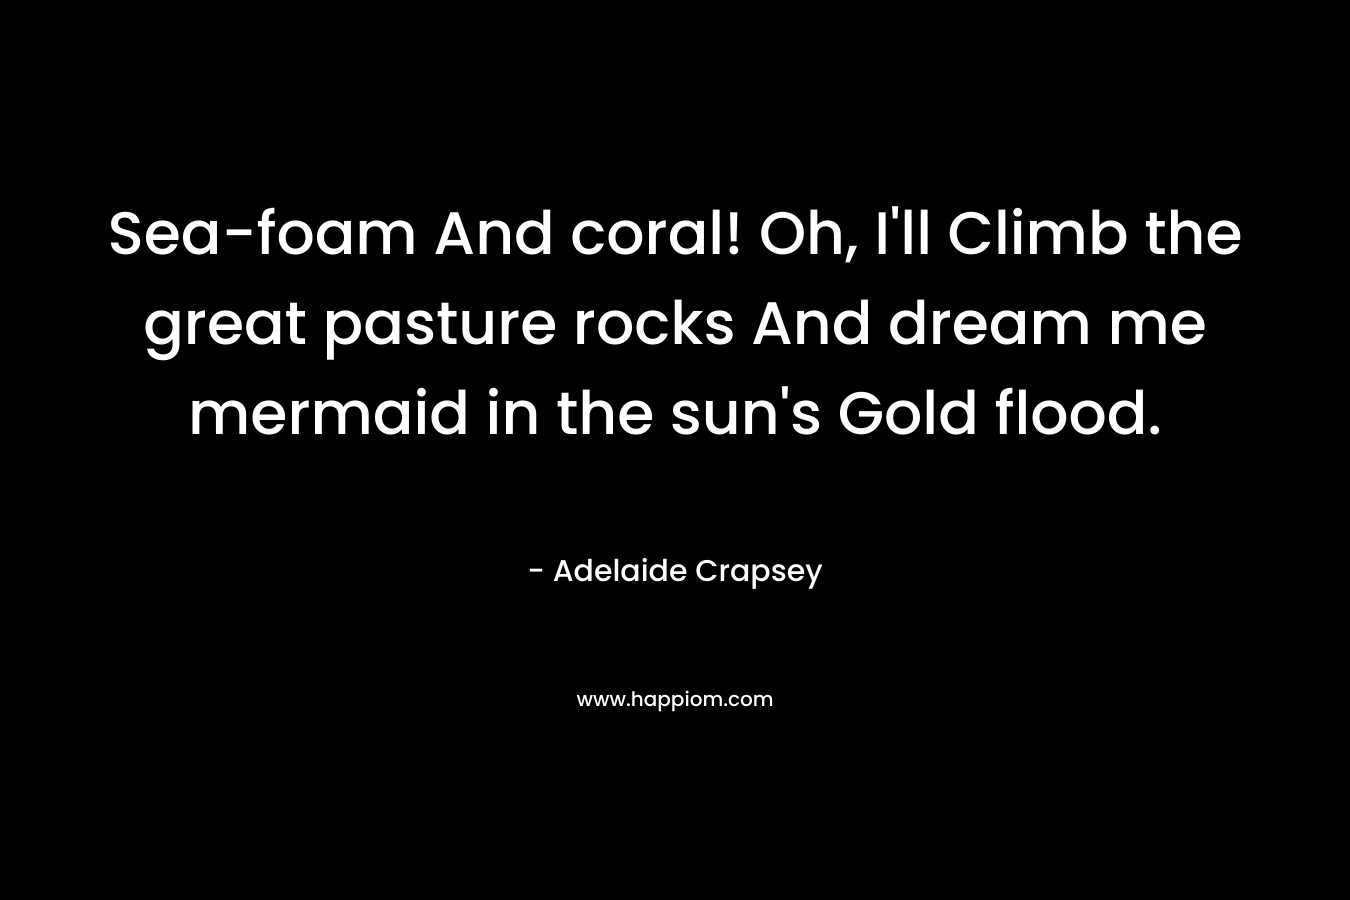 Sea-foam And coral! Oh, I’ll Climb the great pasture rocks And dream me mermaid in the sun’s Gold flood. – Adelaide Crapsey